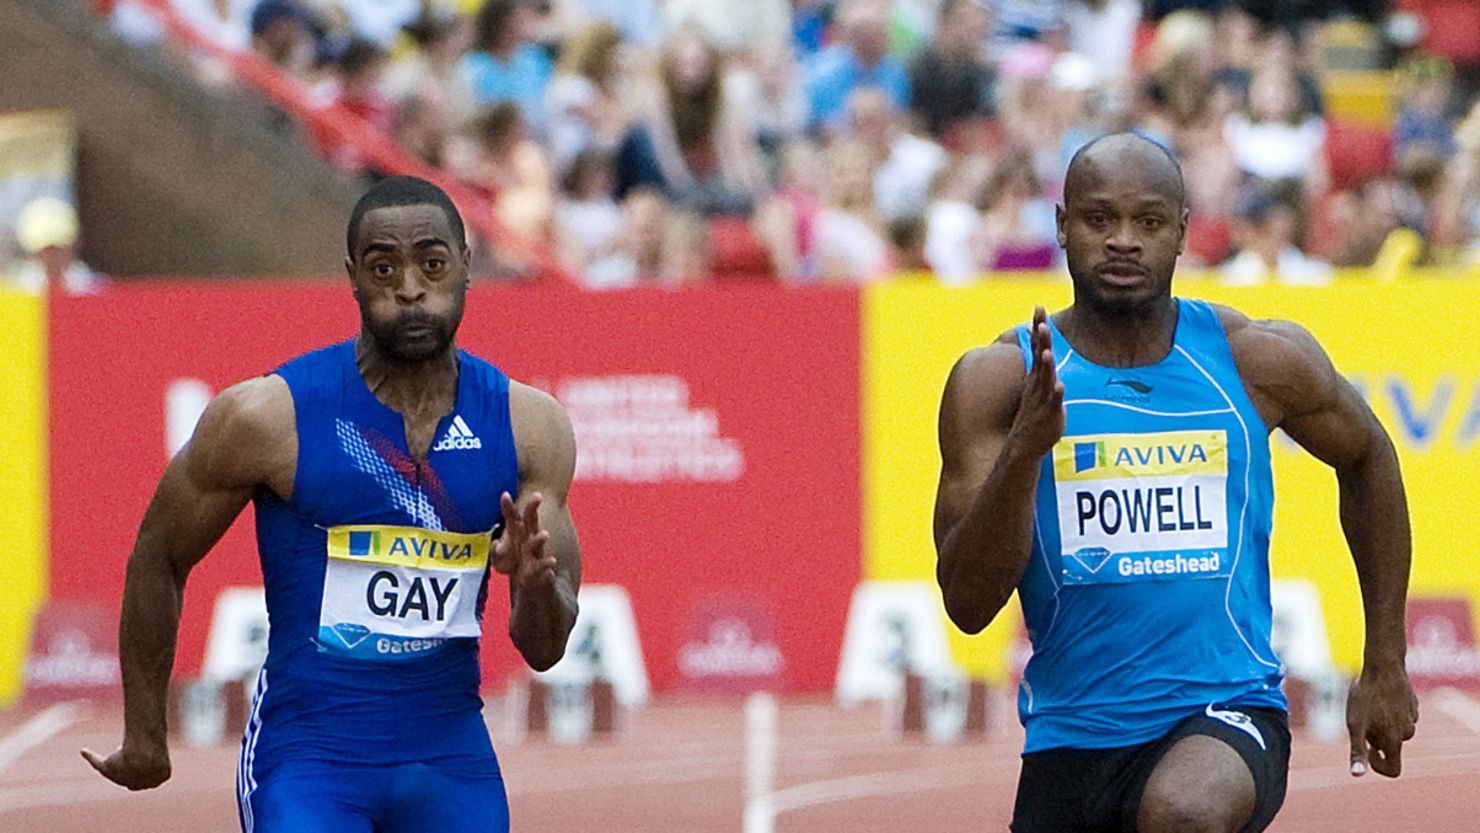 Tyson Gay (left) and Asafa Powell (right) both tested positive for banned substances.